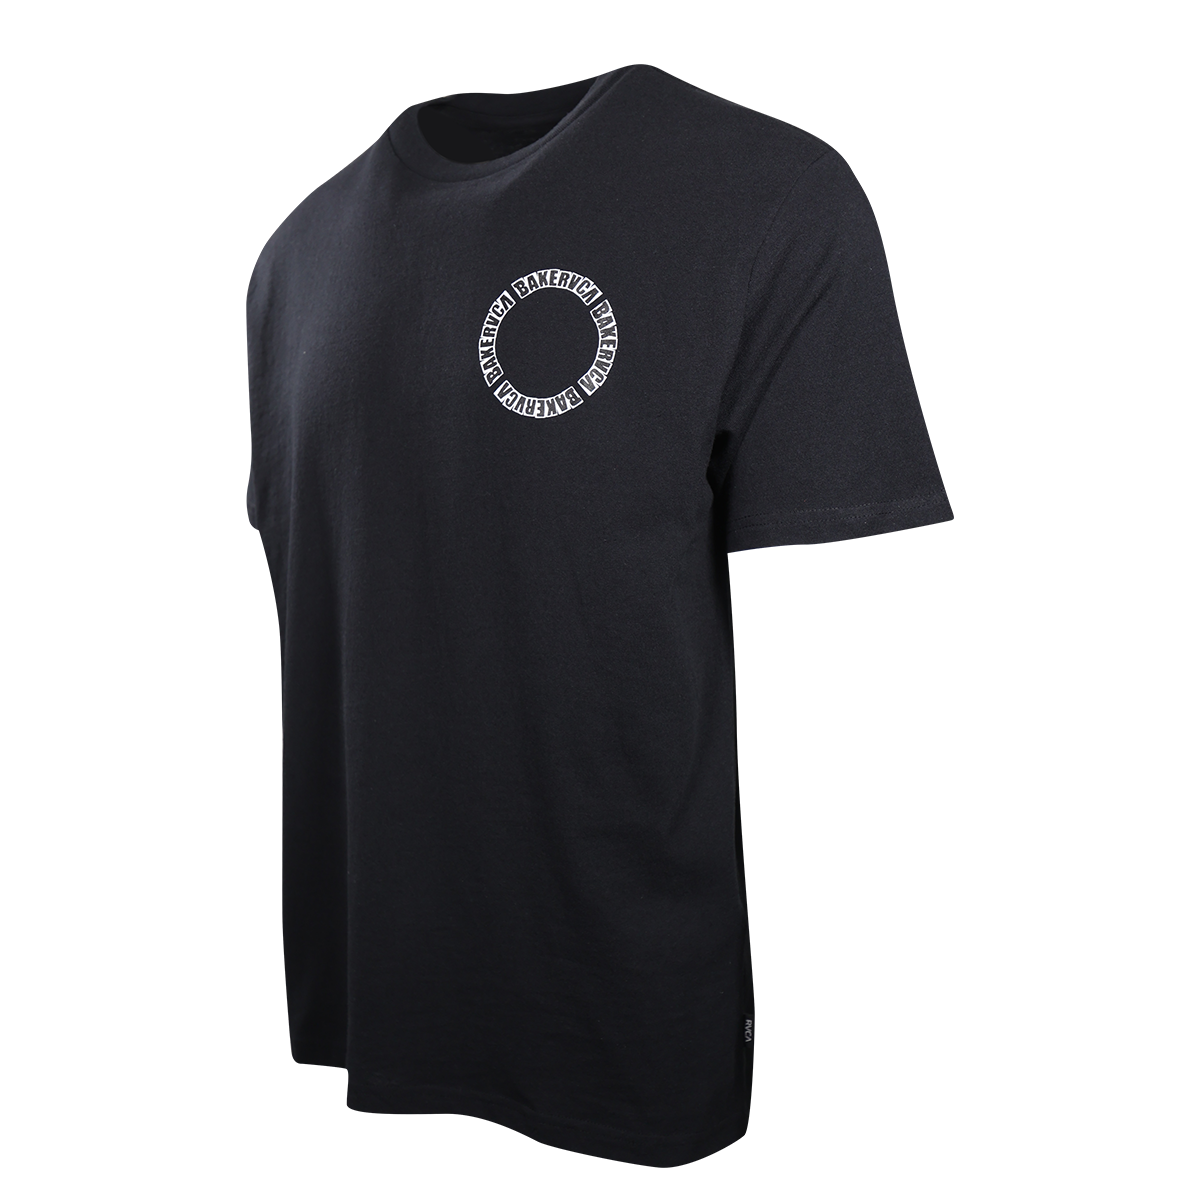 RVCA Men's Black BAKERVCA Circle Relaxed Fit S/S T-Shirt (S10)